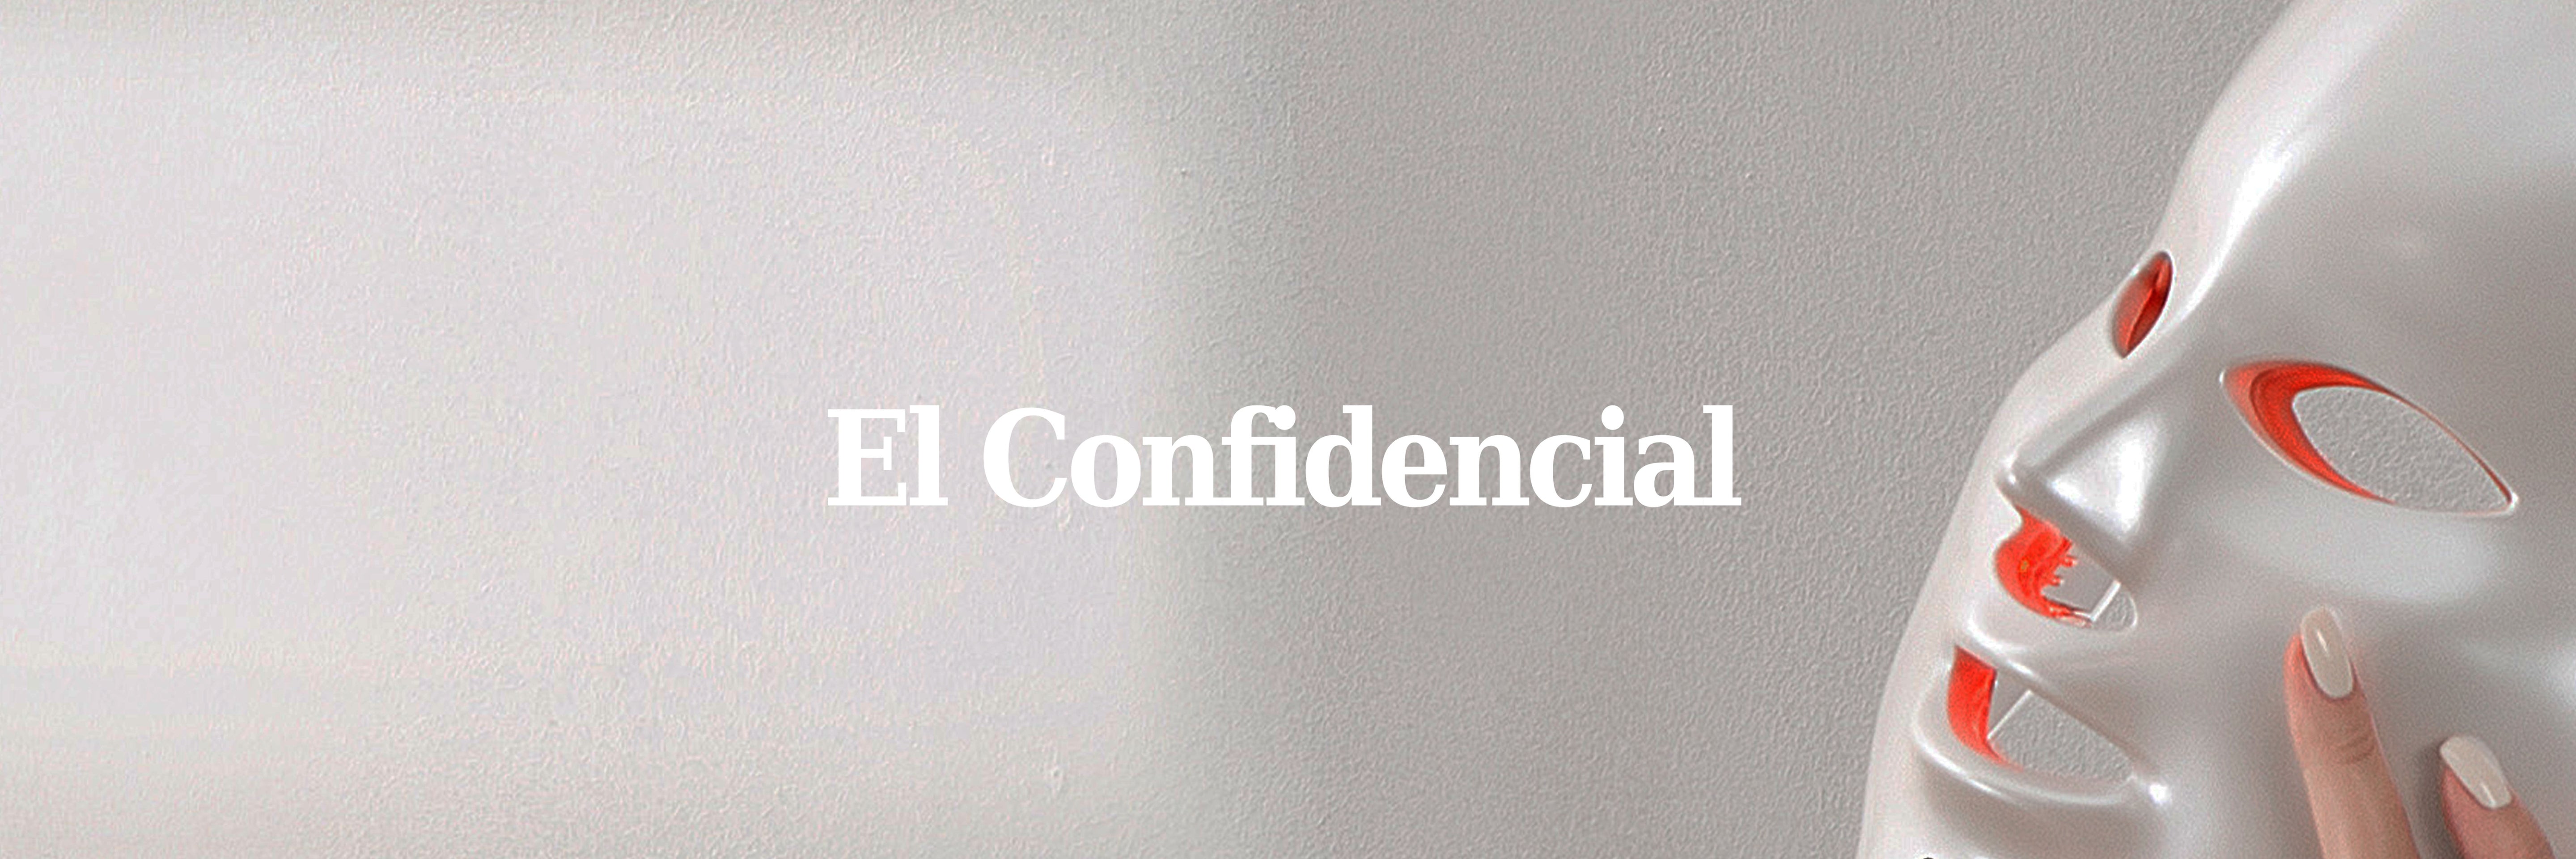 OUR LED LIGHT THERAPY MASKS GETS SOME LOVE FROM EL CONFIDENCIAL